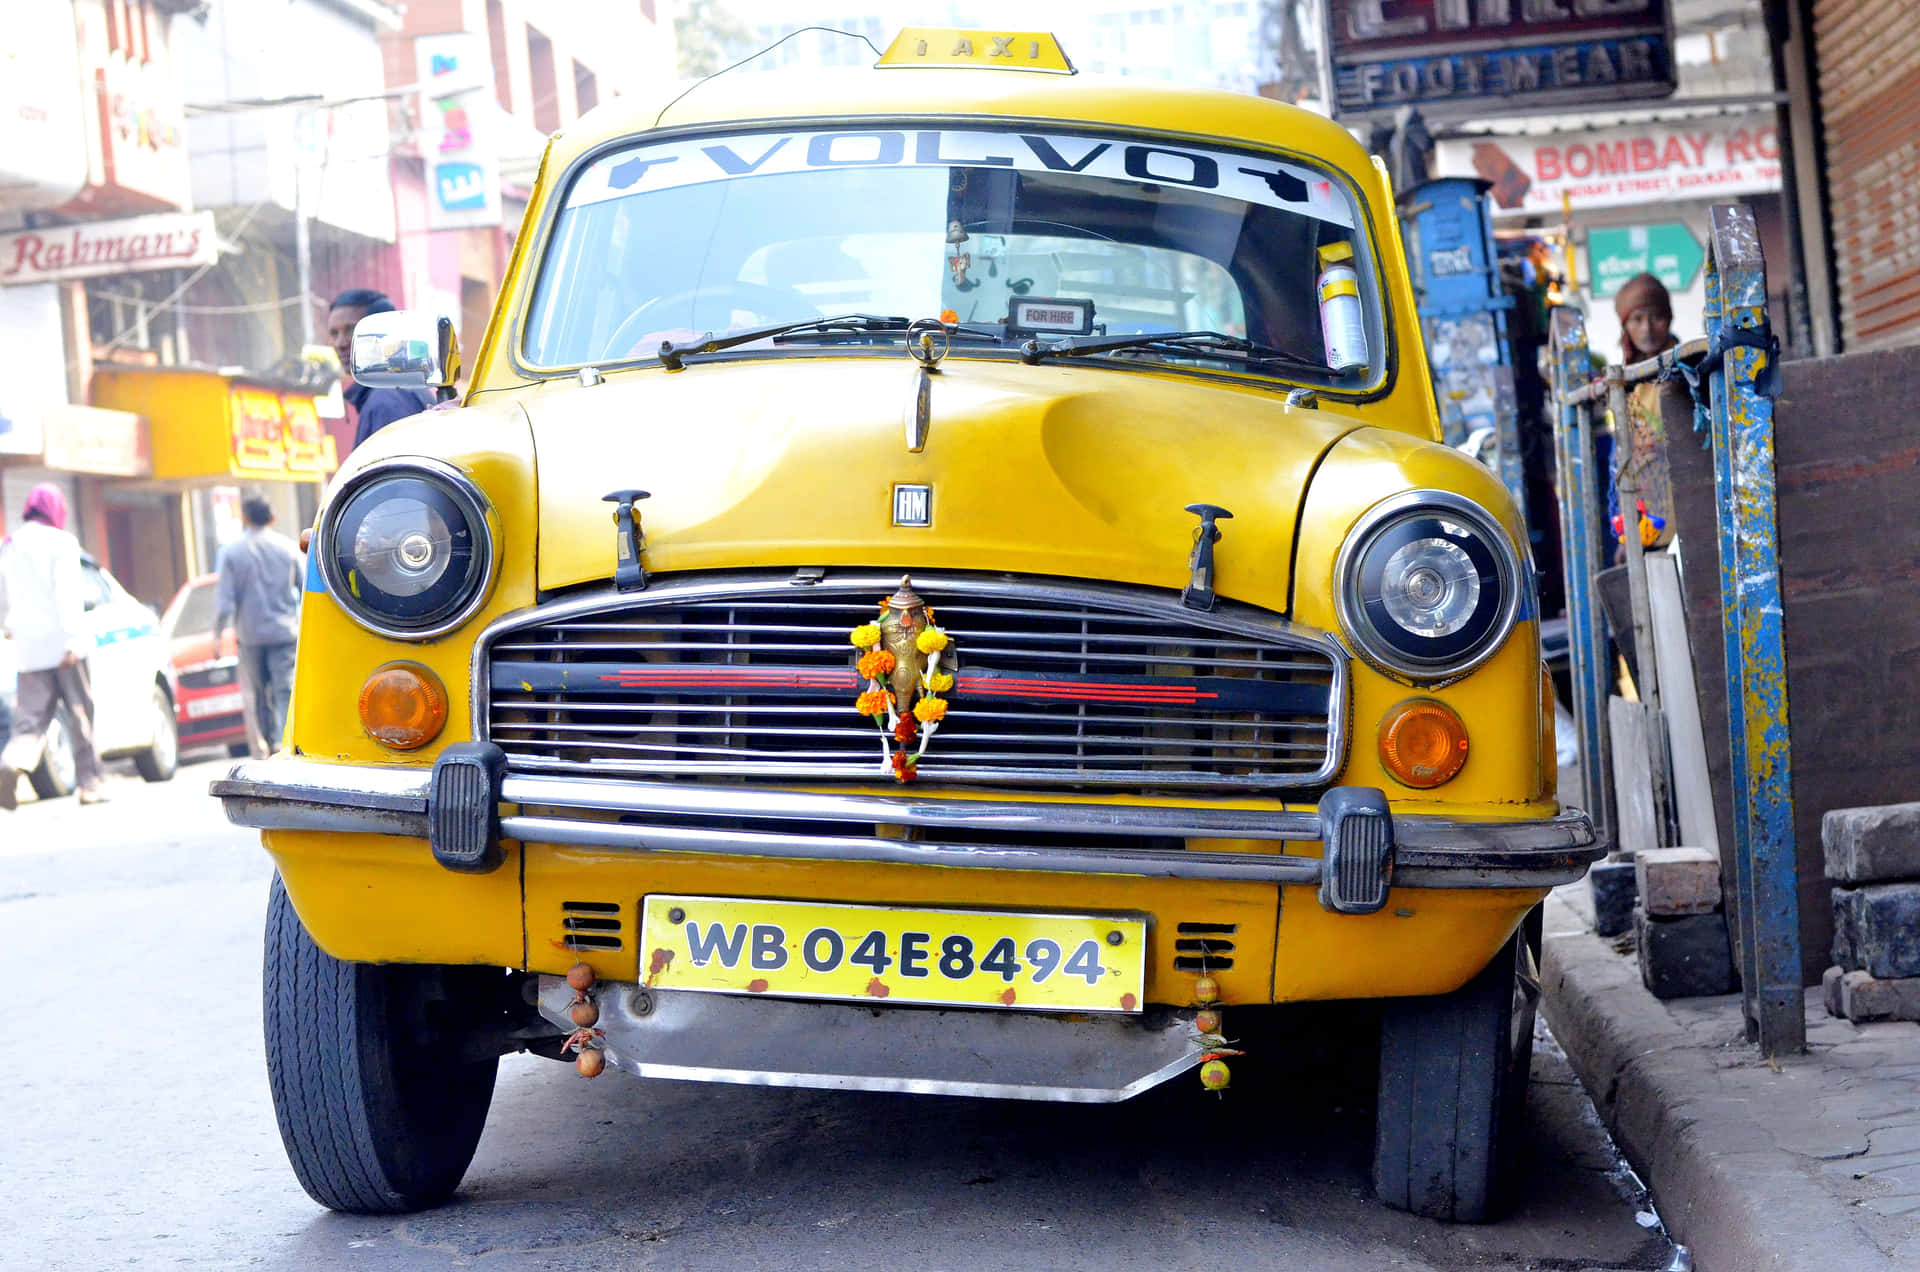 Iconic Yellow Cab cruising through the city streets Wallpaper